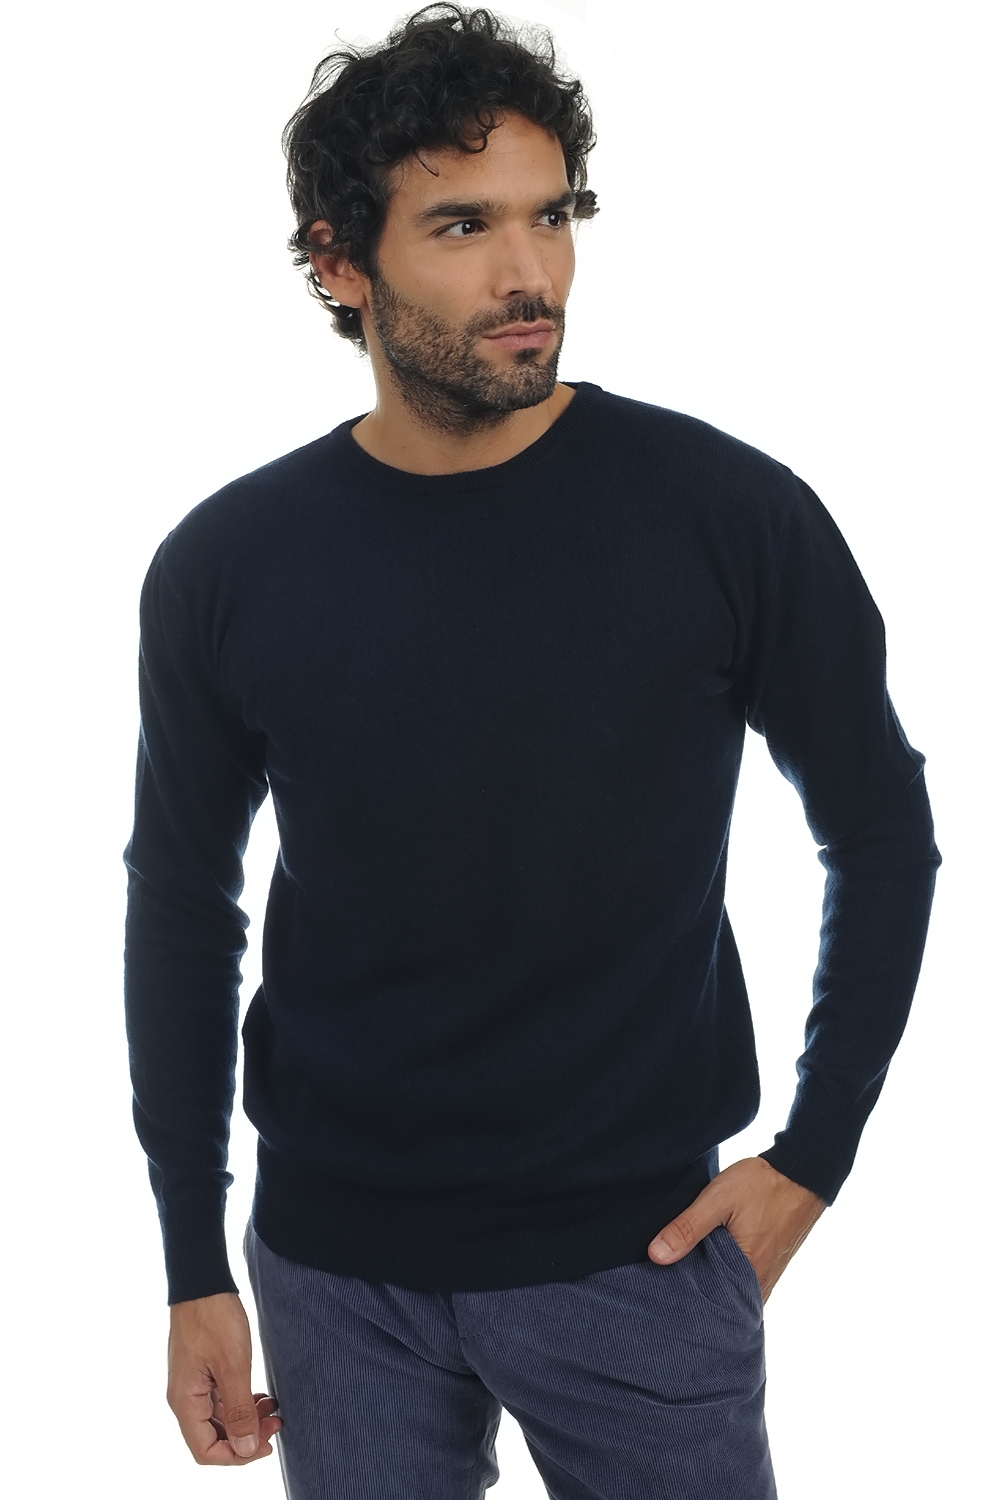 Cachemire pull homme col rond keaton marine fonce xs